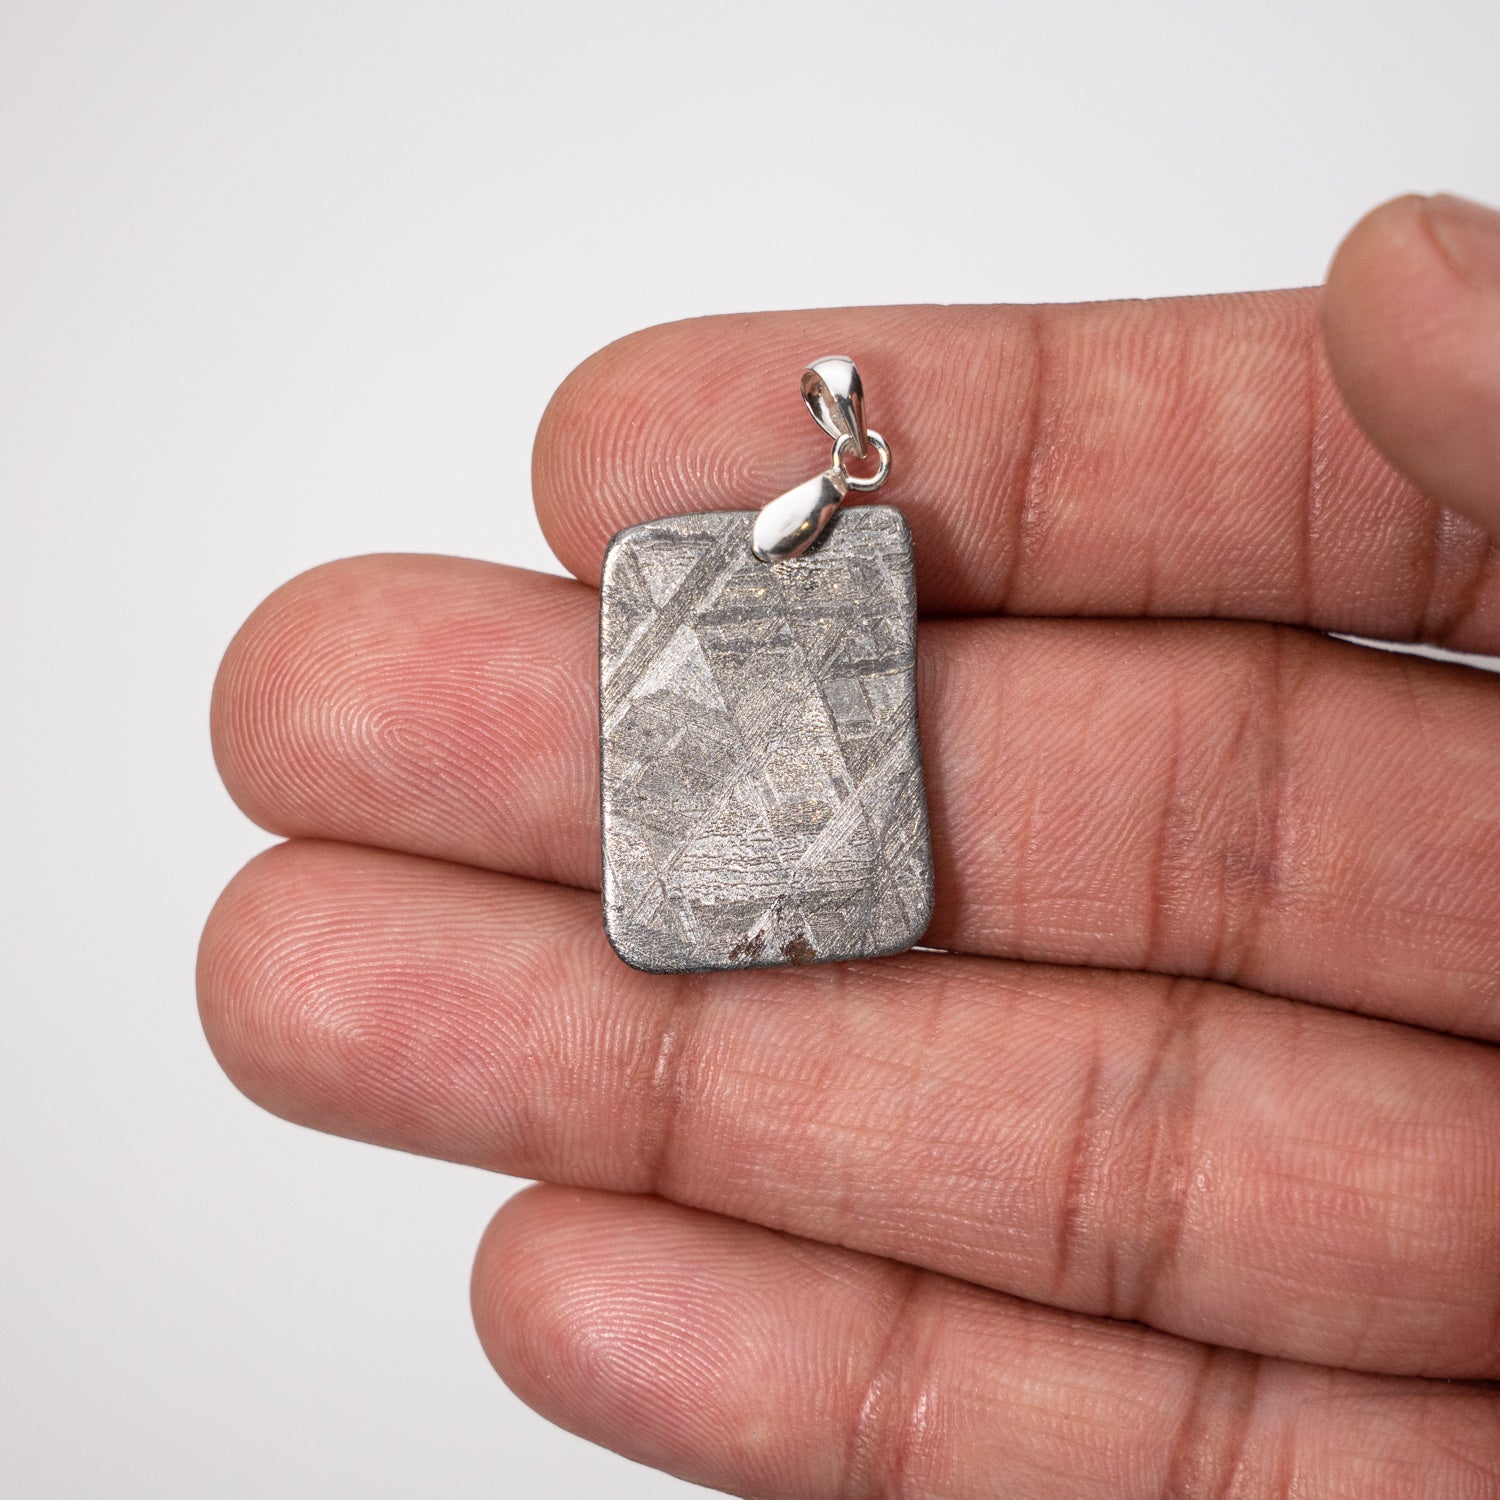 Polished Seymchan Meteorite pendant (8.2 grams) with 18" Sterling Silver Chain